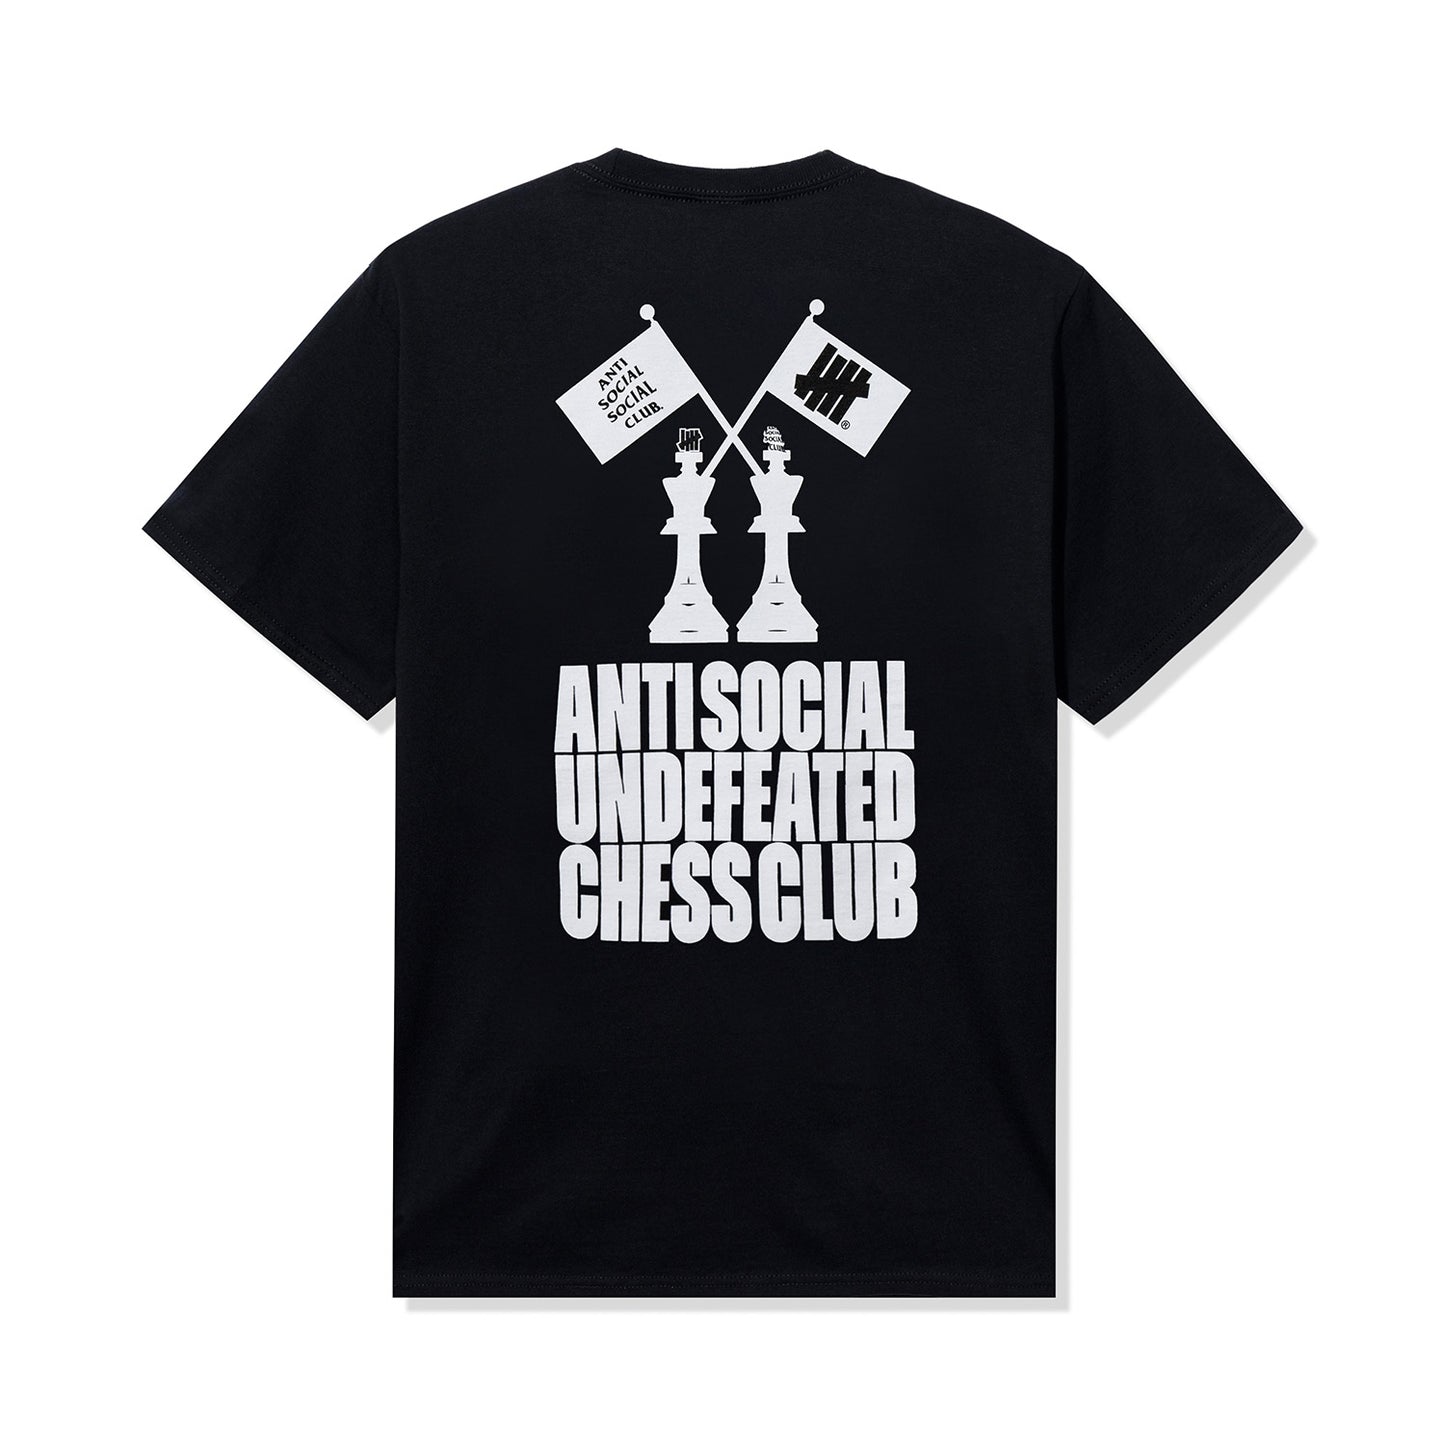 ASSC x Undefeated Chess Club Tee - Black